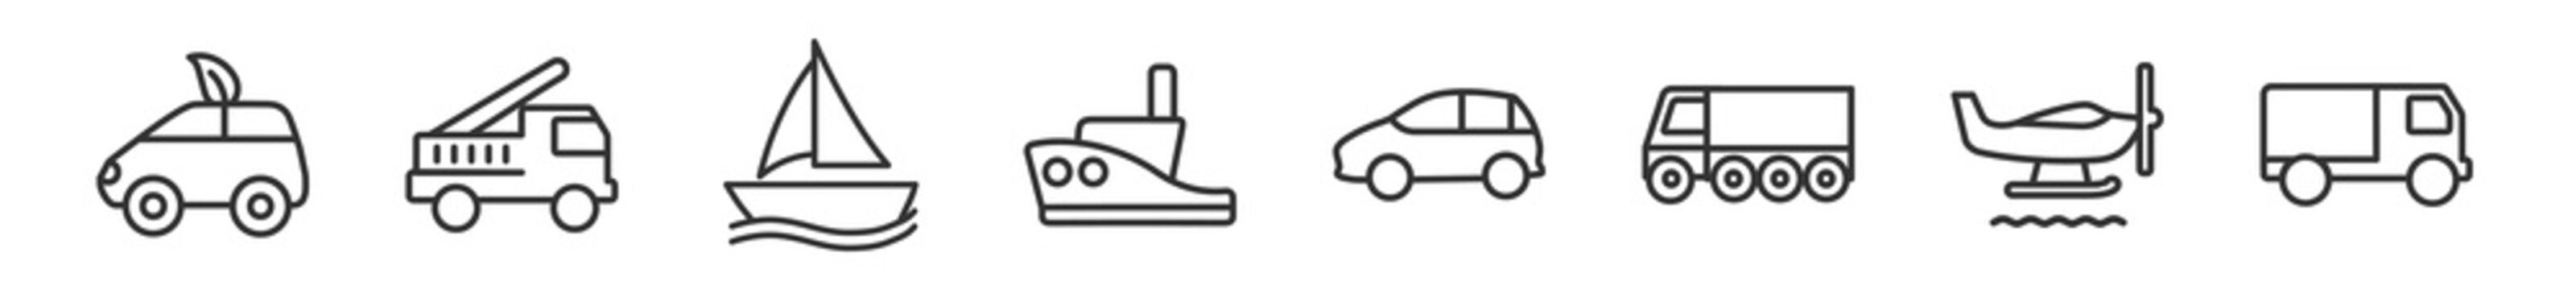 outline set of transportation line icons. linear vector icons such as eco-friendly transport, fire truck, sailboat, tugboat, hatchback, truck. vector illustration.